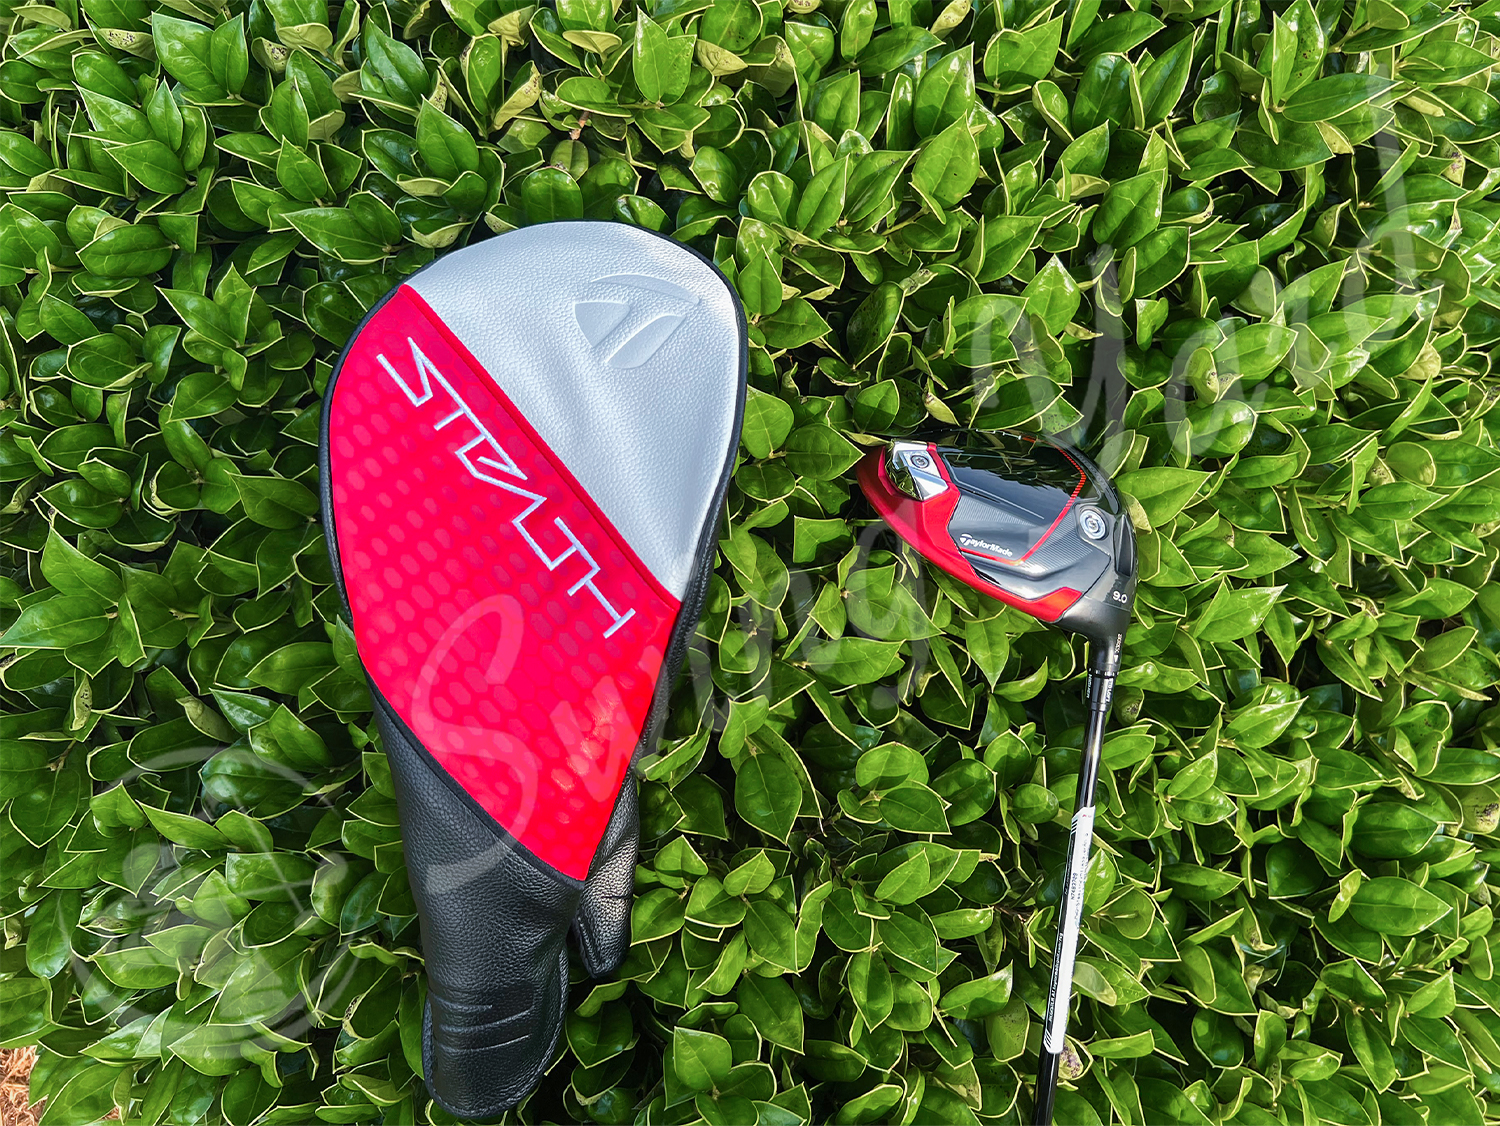 The TaylorMade Stealth 2 headcover and a driver